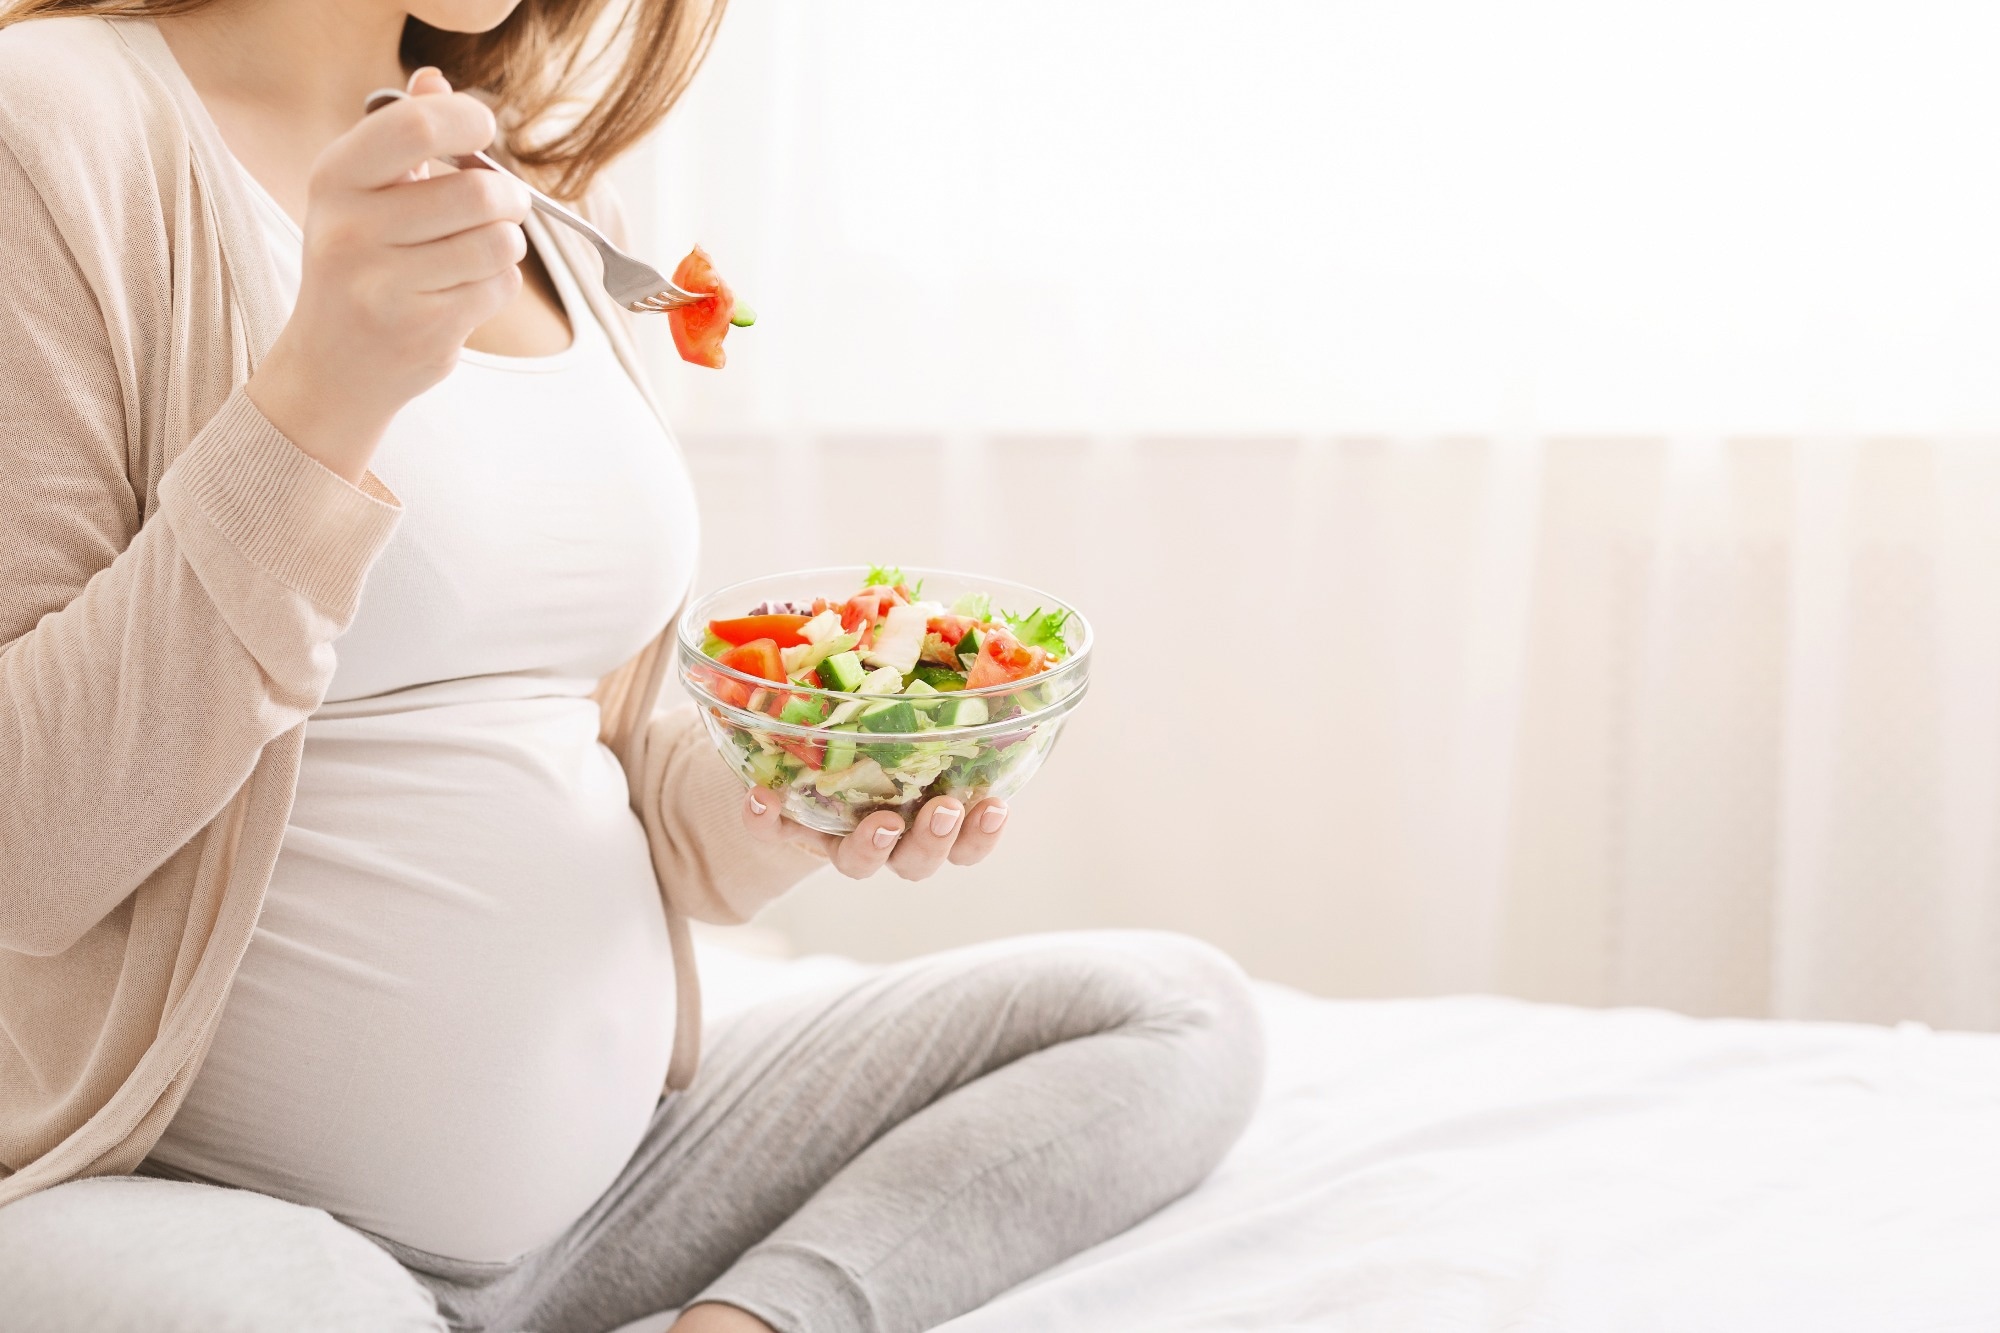 Study: Can Dietary Patterns Impact Fertility Outcomes? A Systematic Review and Meta-Analysis. Image Credit: Prostock-studio/Shutterstock.com